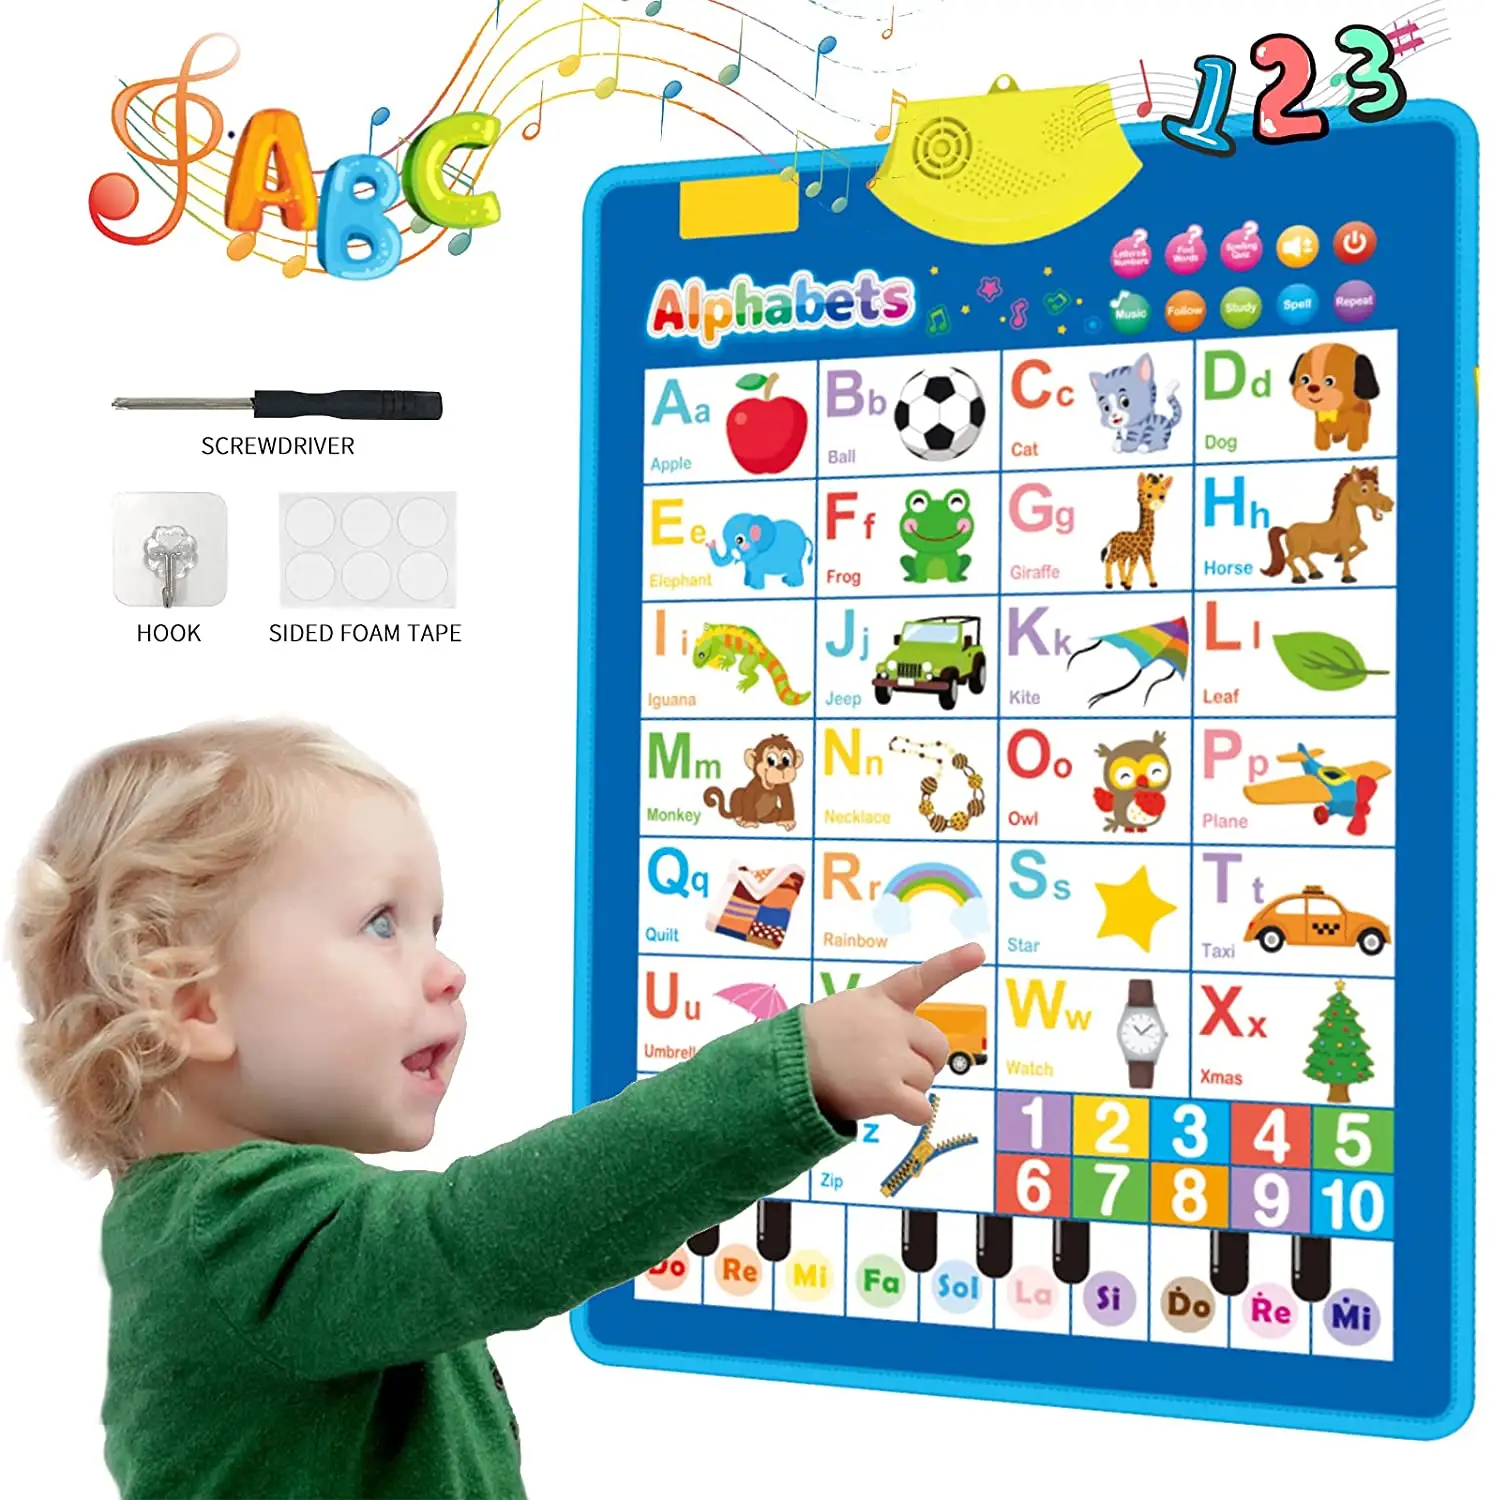 Electronic Interactive Alphabet Wall Chart, Talking ABC & 123 & Music Poster, Best Educational Toy for Toddler. Kids Fun